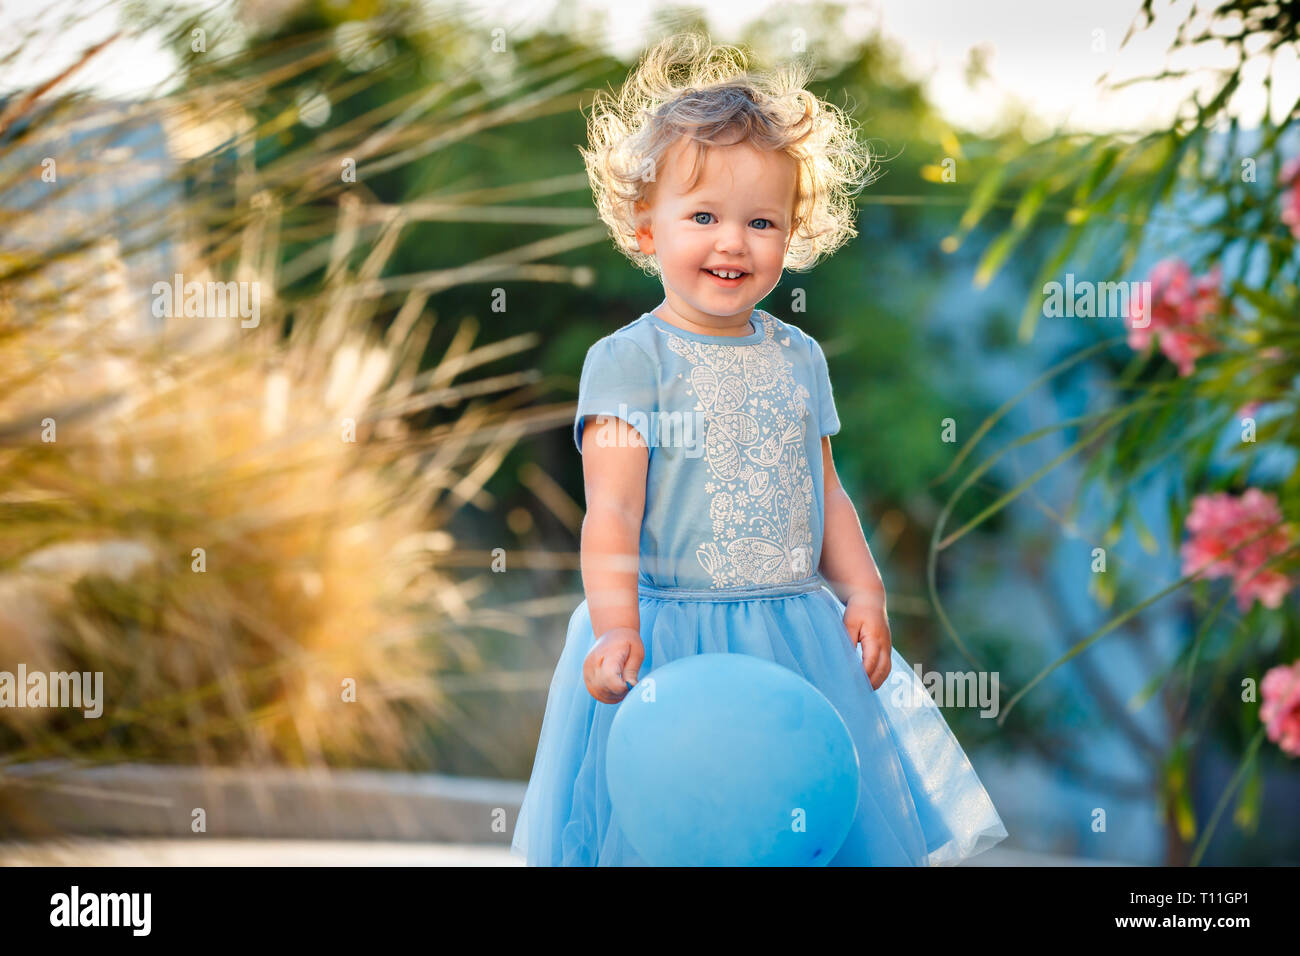 Portrait of happy little girl with curly blonde hair in casual clothes posing outdoors with blue ballons on hand Stock Photo